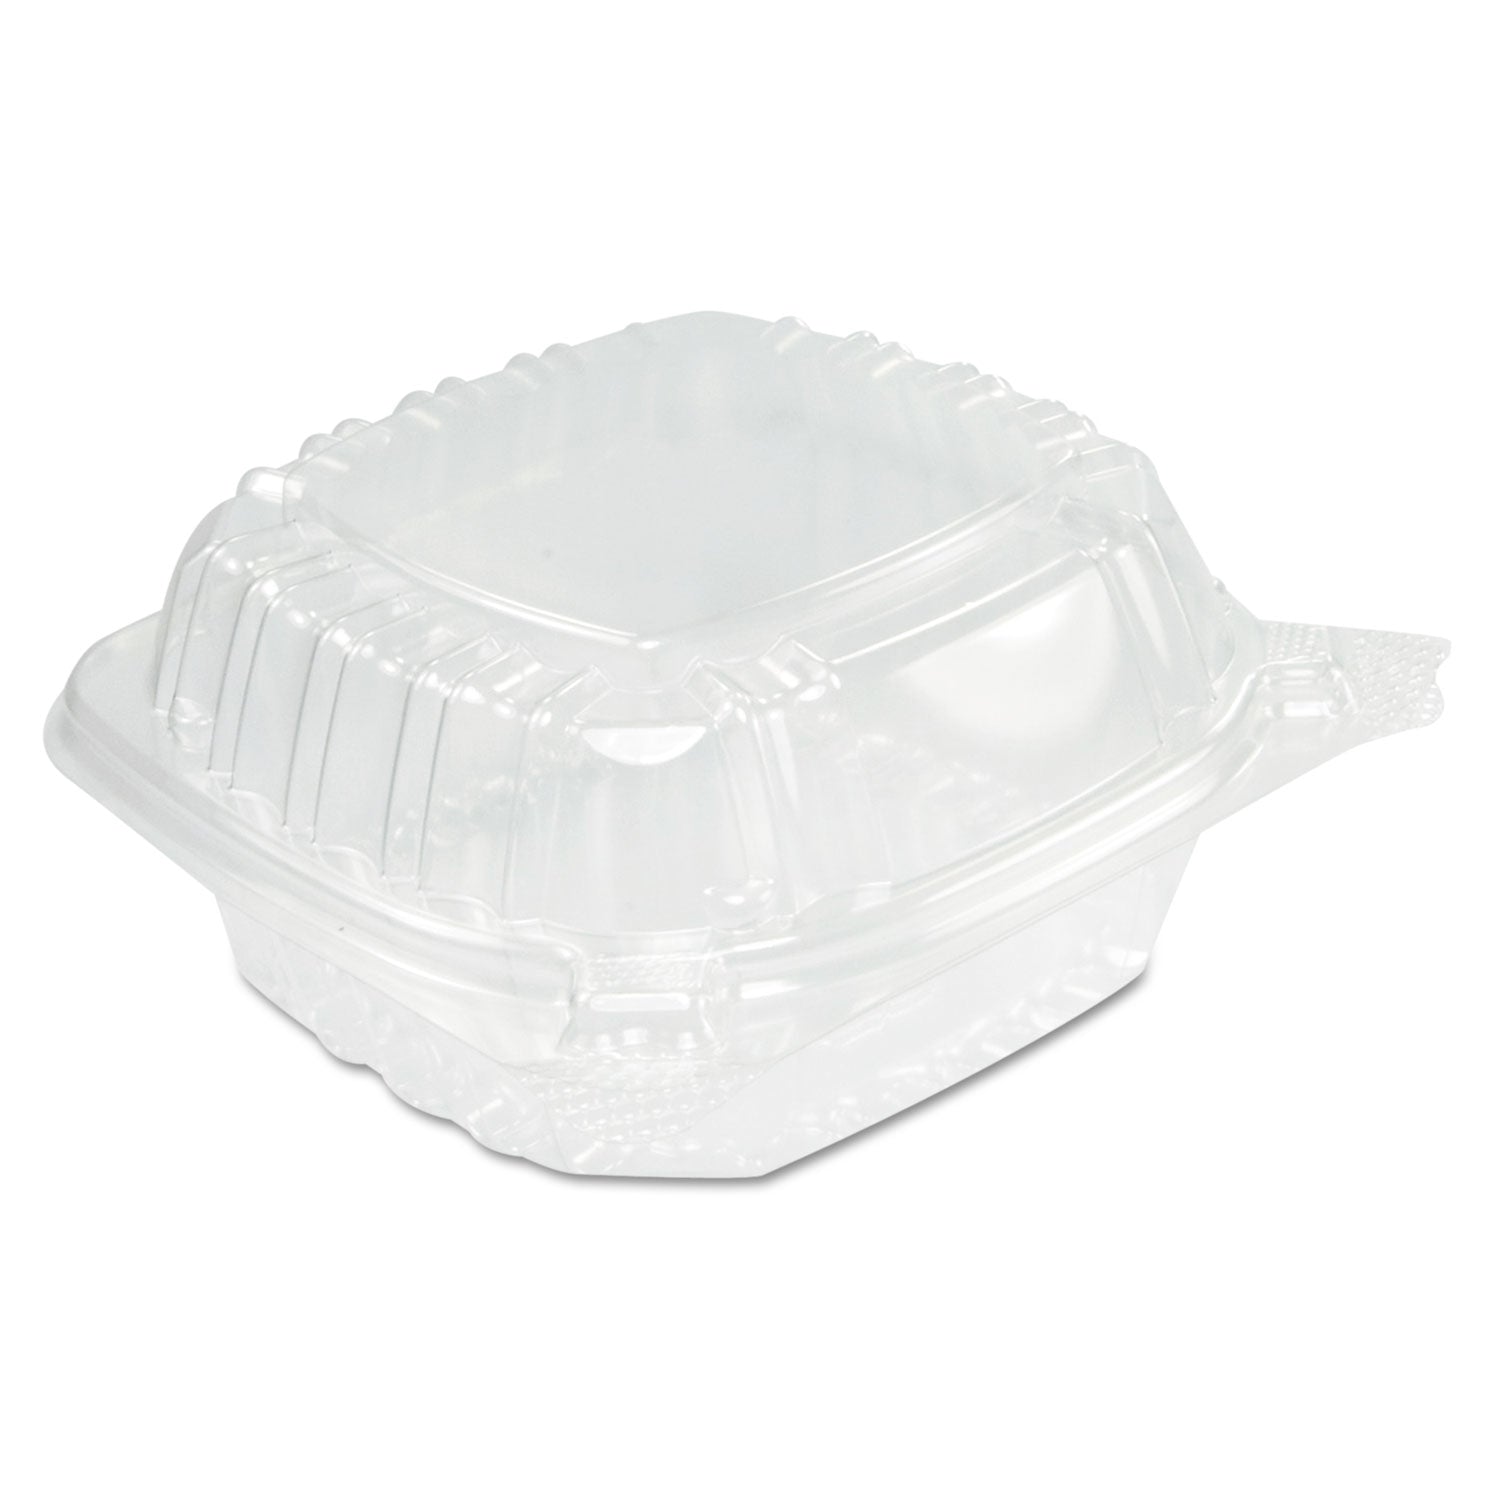 ClearSeal Hinged-Lid Plastic Containers, Sandwich Container, 13.8 oz, 5.4 x 5.3 x 2.6, Clear, Plastic, 500/Carton - 